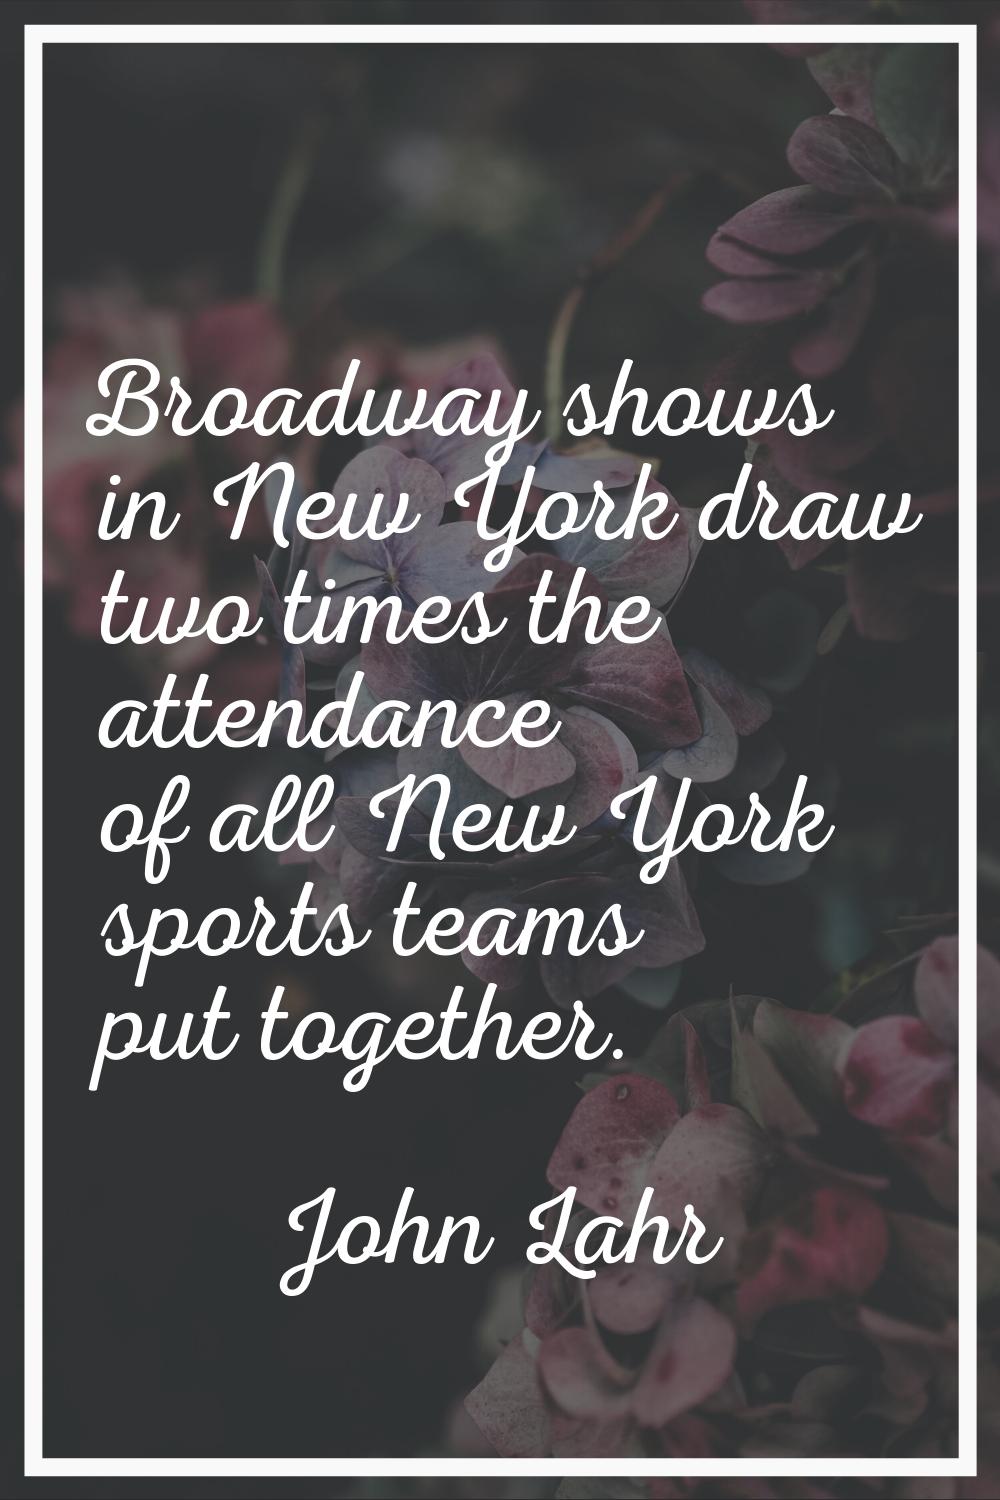 Broadway shows in New York draw two times the attendance of all New York sports teams put together.